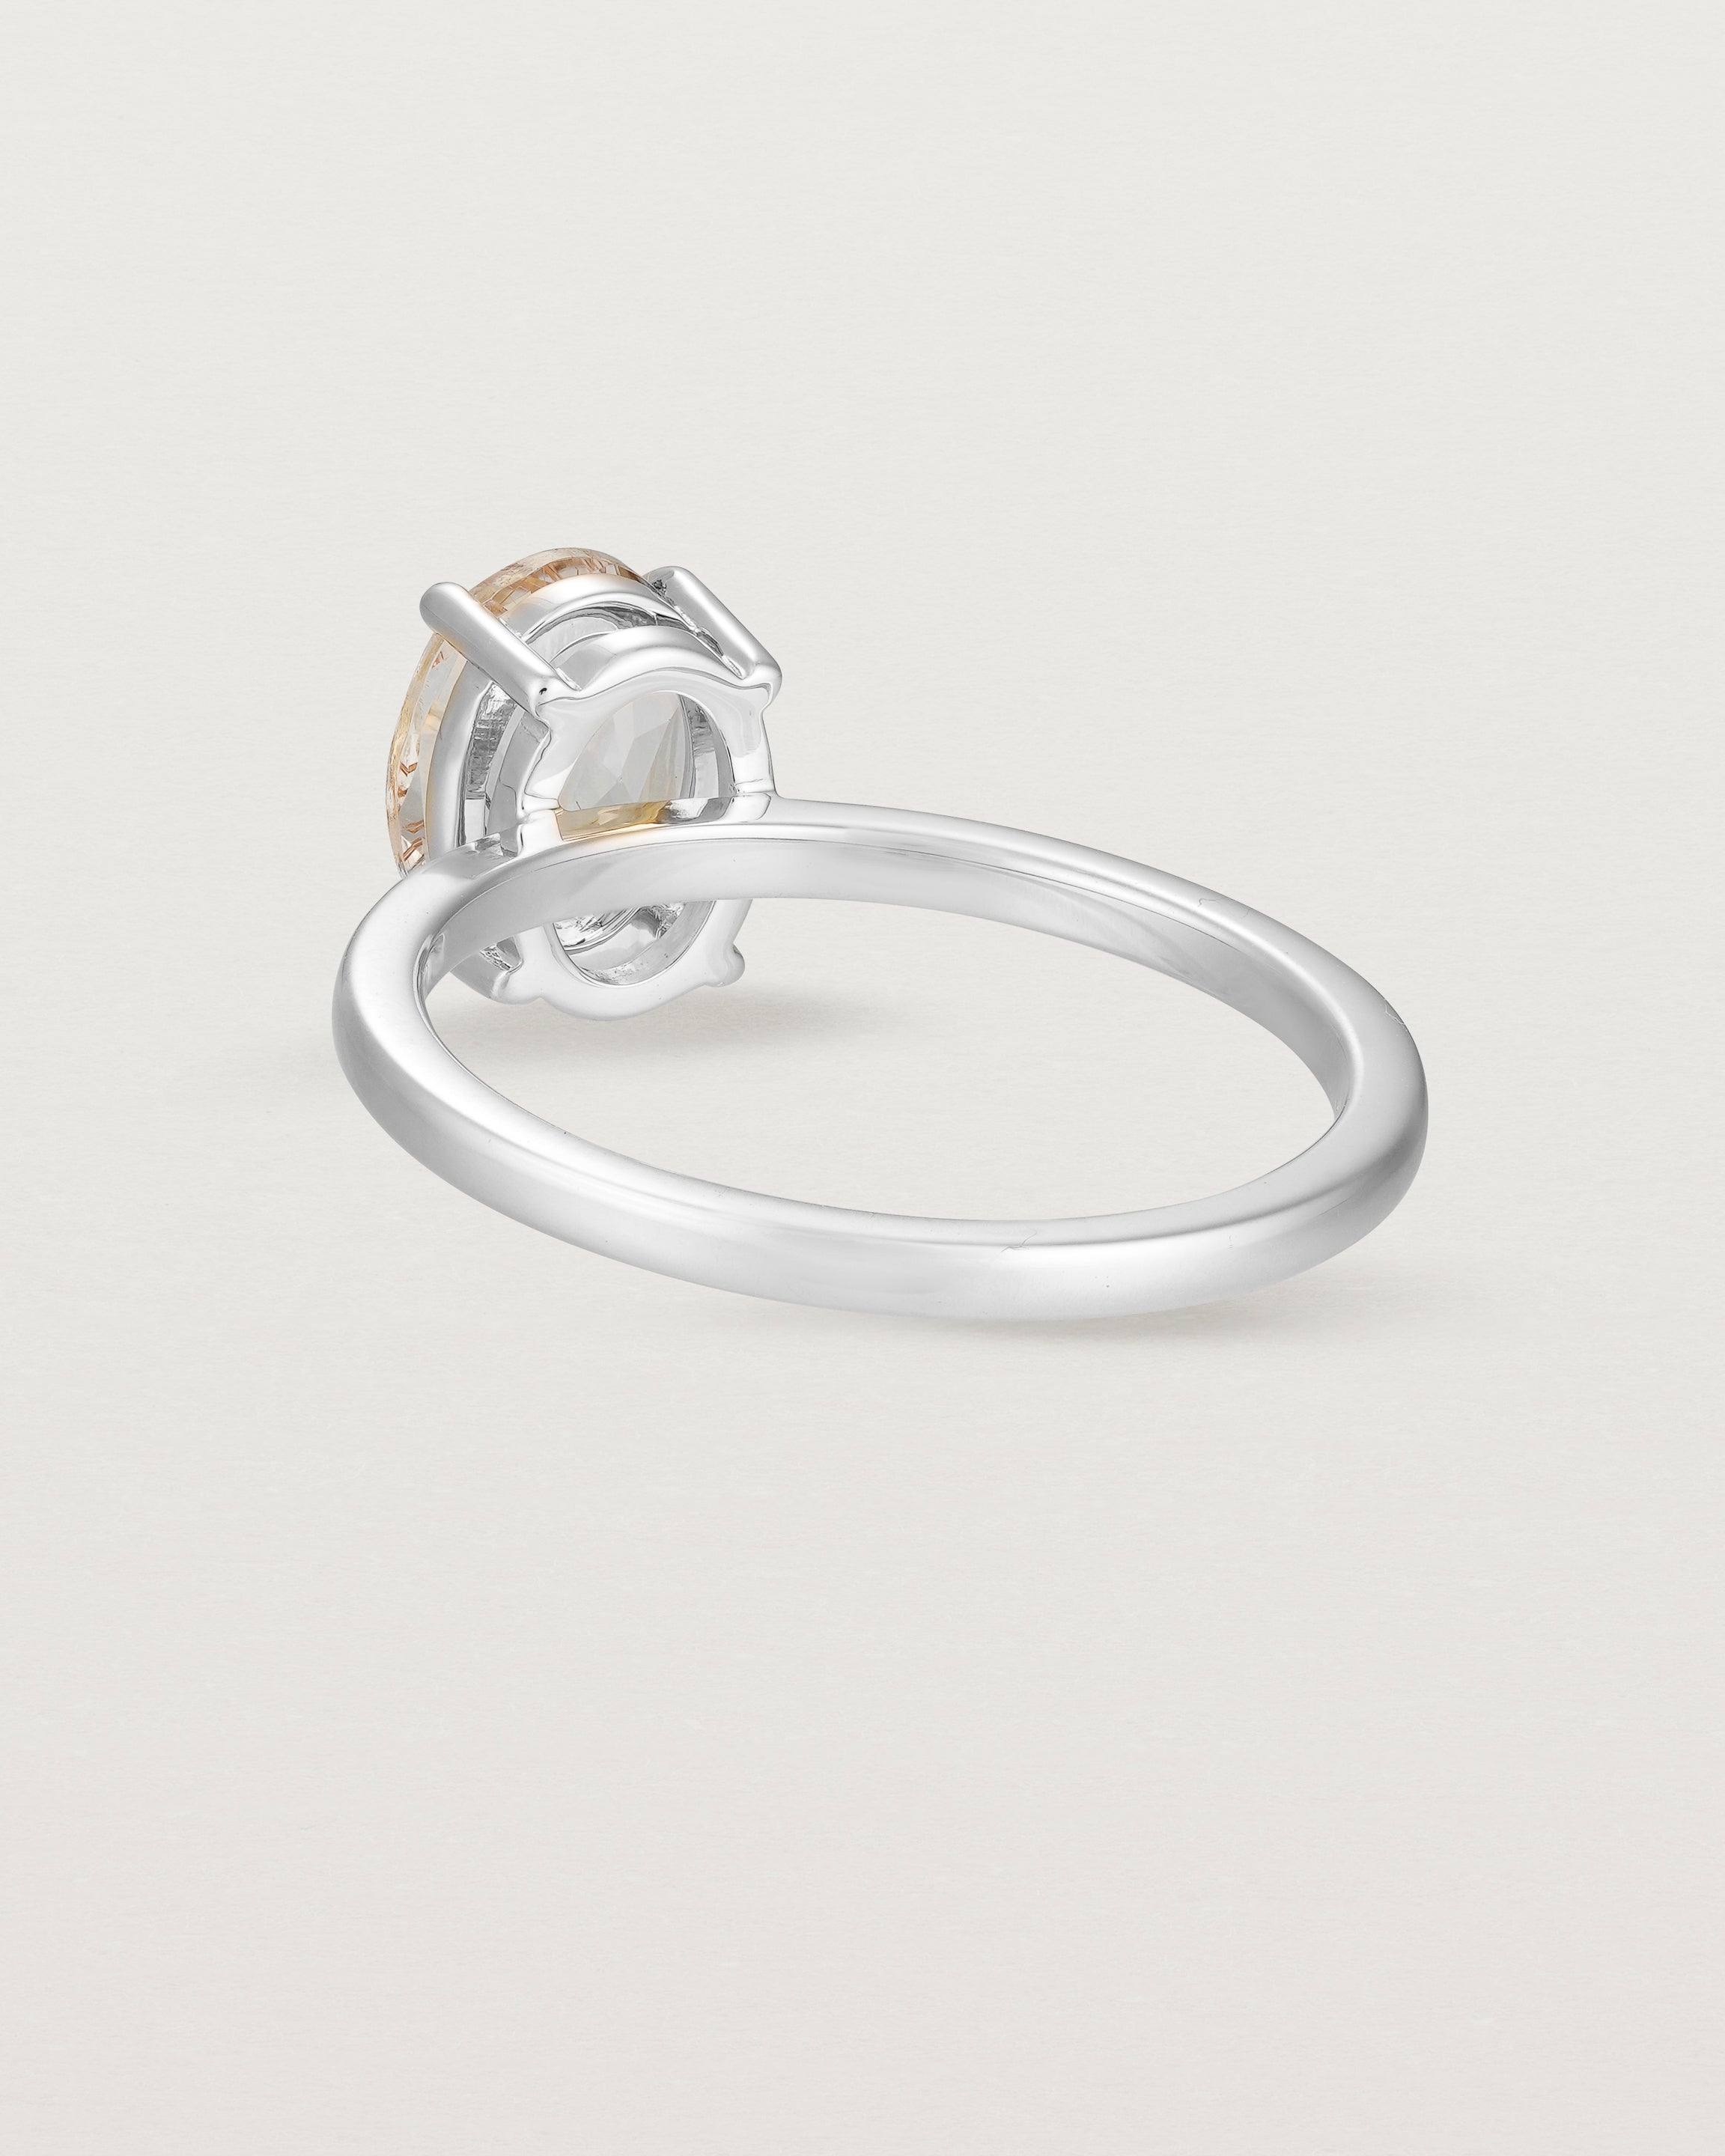 Back view of the Una Oval Solitaire | Rutilated Quartz | White Gold.